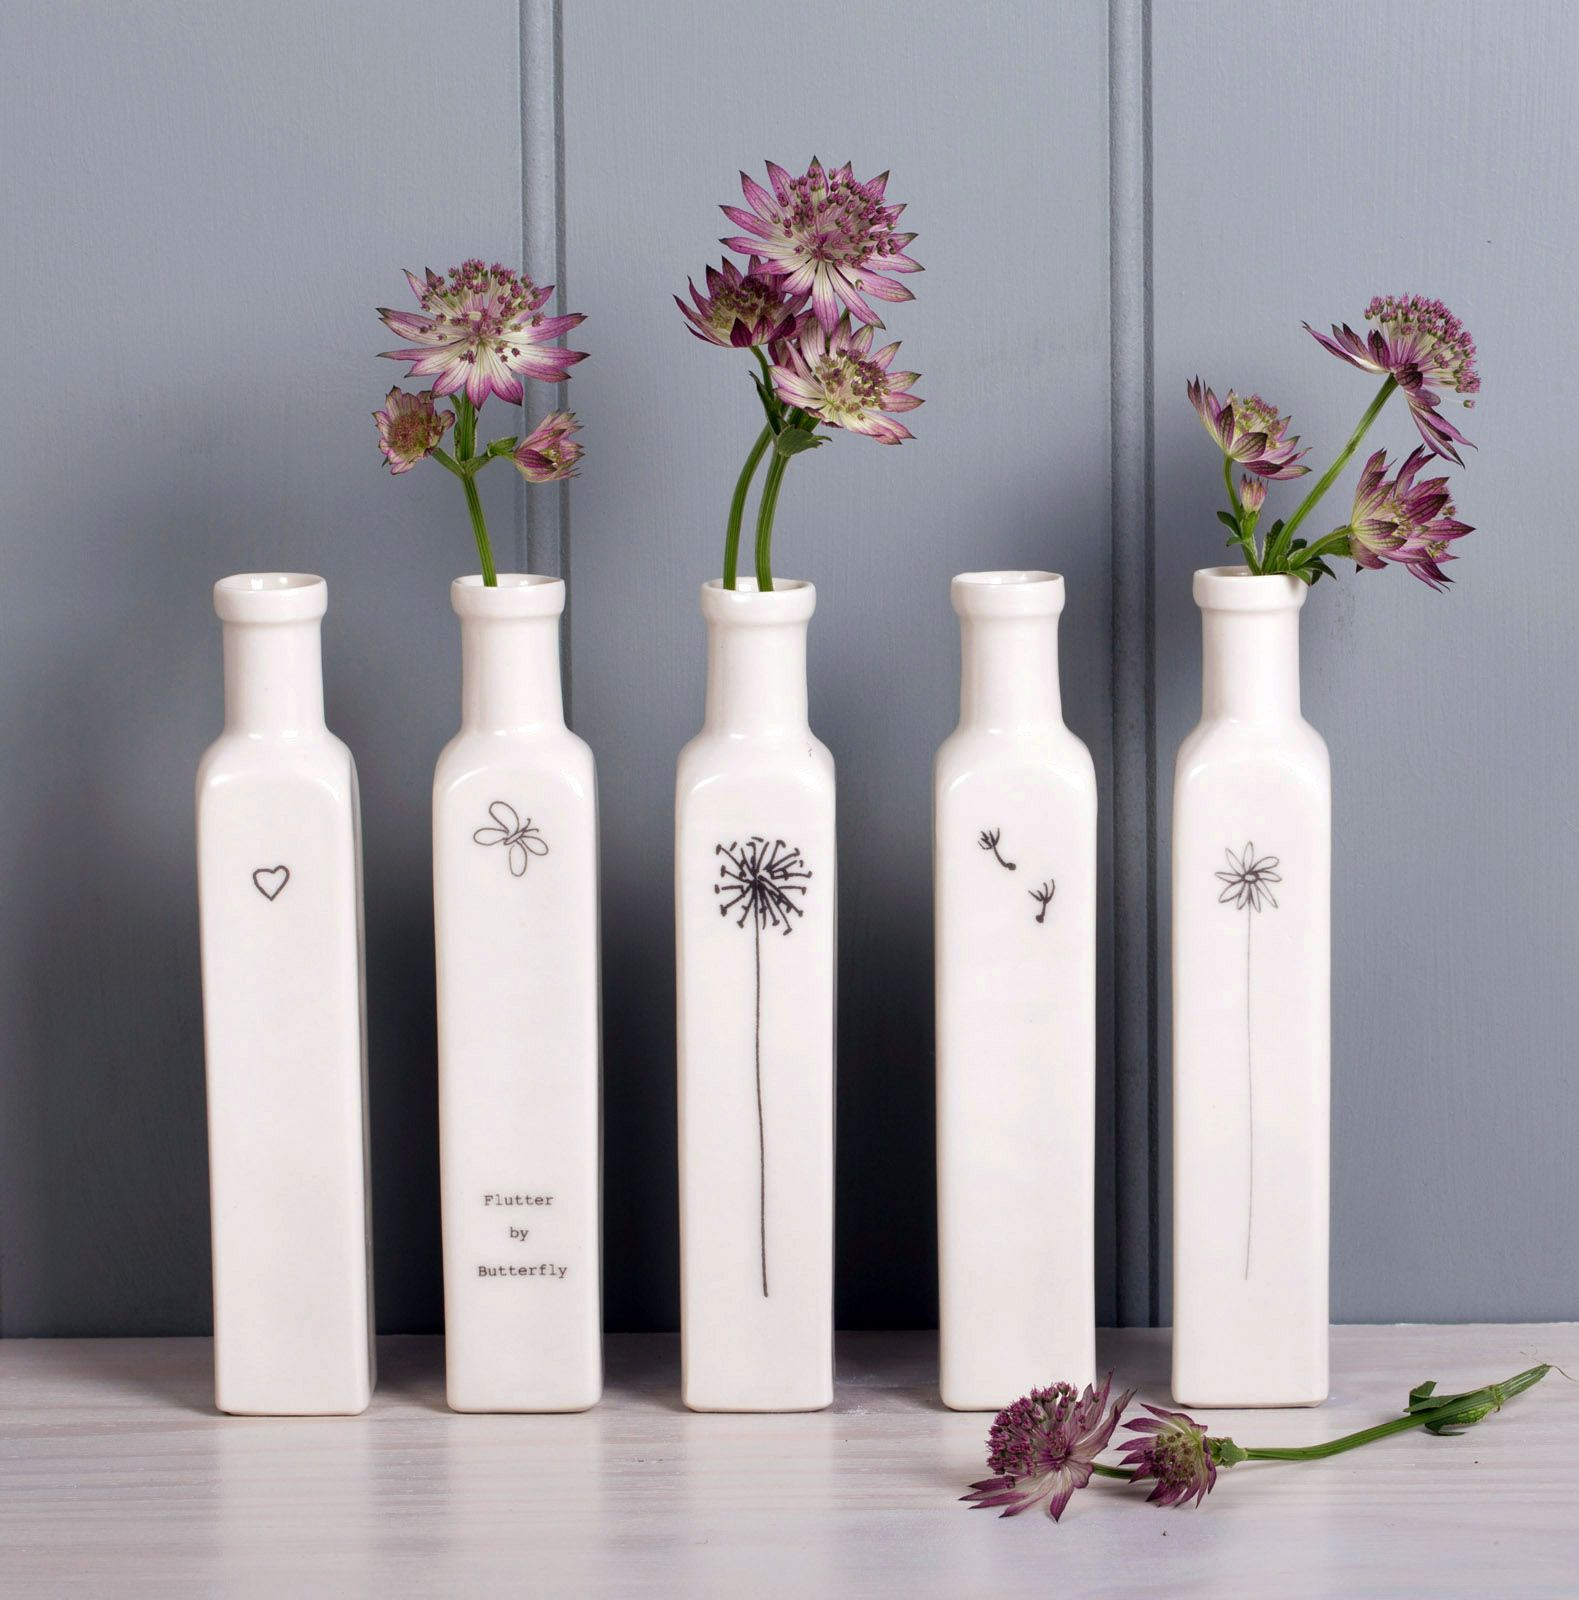 13 Recommended Tall Skinny Vases 2024 free download tall skinny vases of boop design a set of tall thin bottle vases available from http with regard to boop design a set of tall thin bottle vases available from http www boopdesign com store c